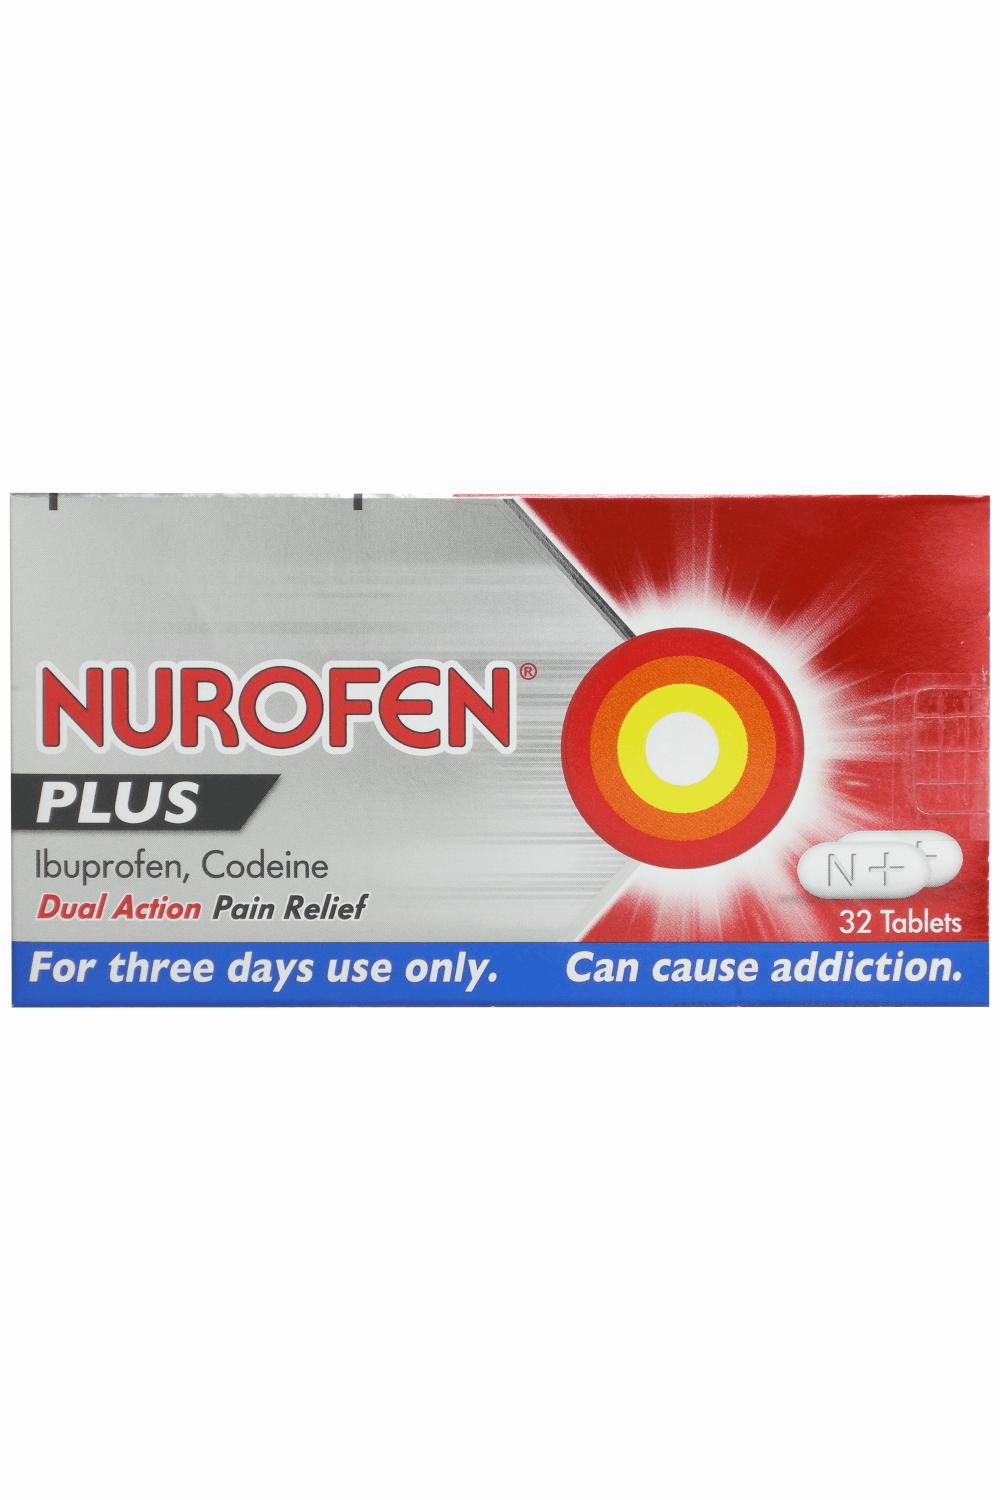 A red and gray box of Nurofen Plus tablets, a medication for pain relief.